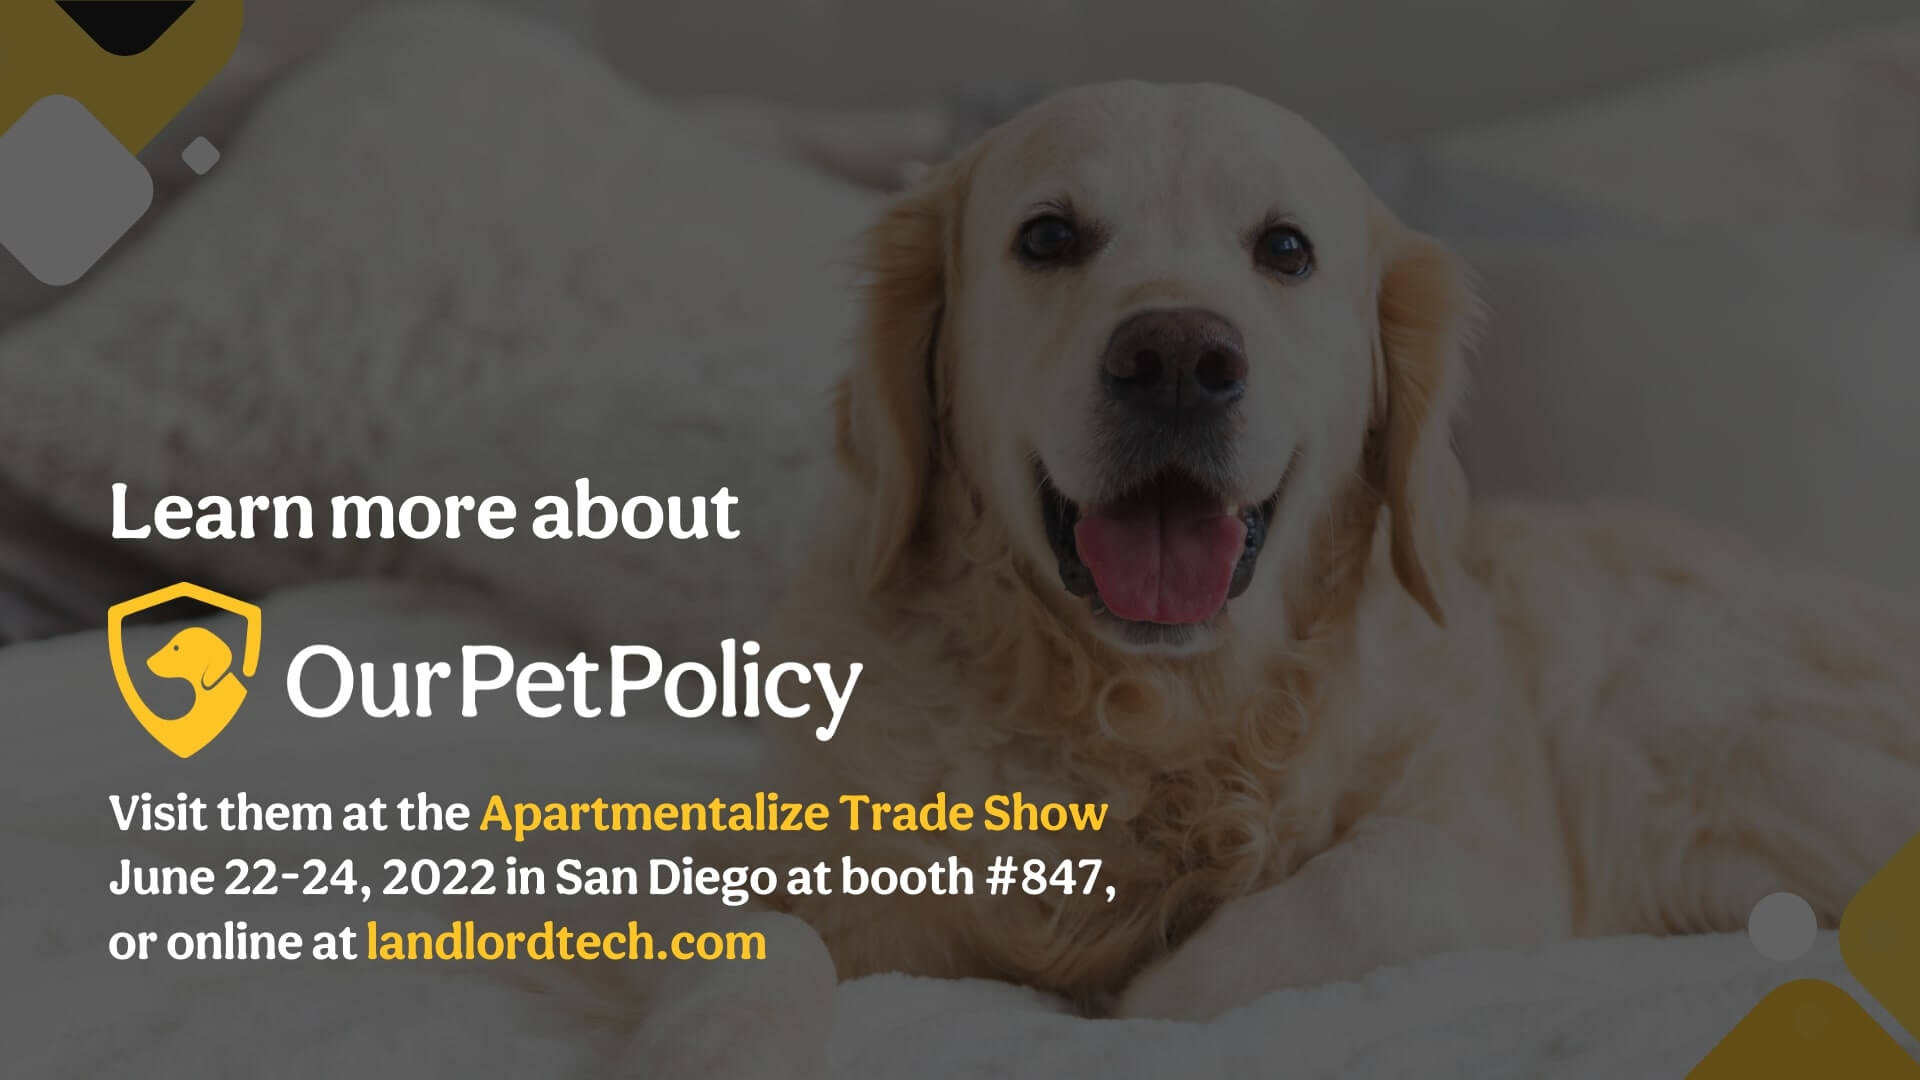 Learn more about OurPetPolicy